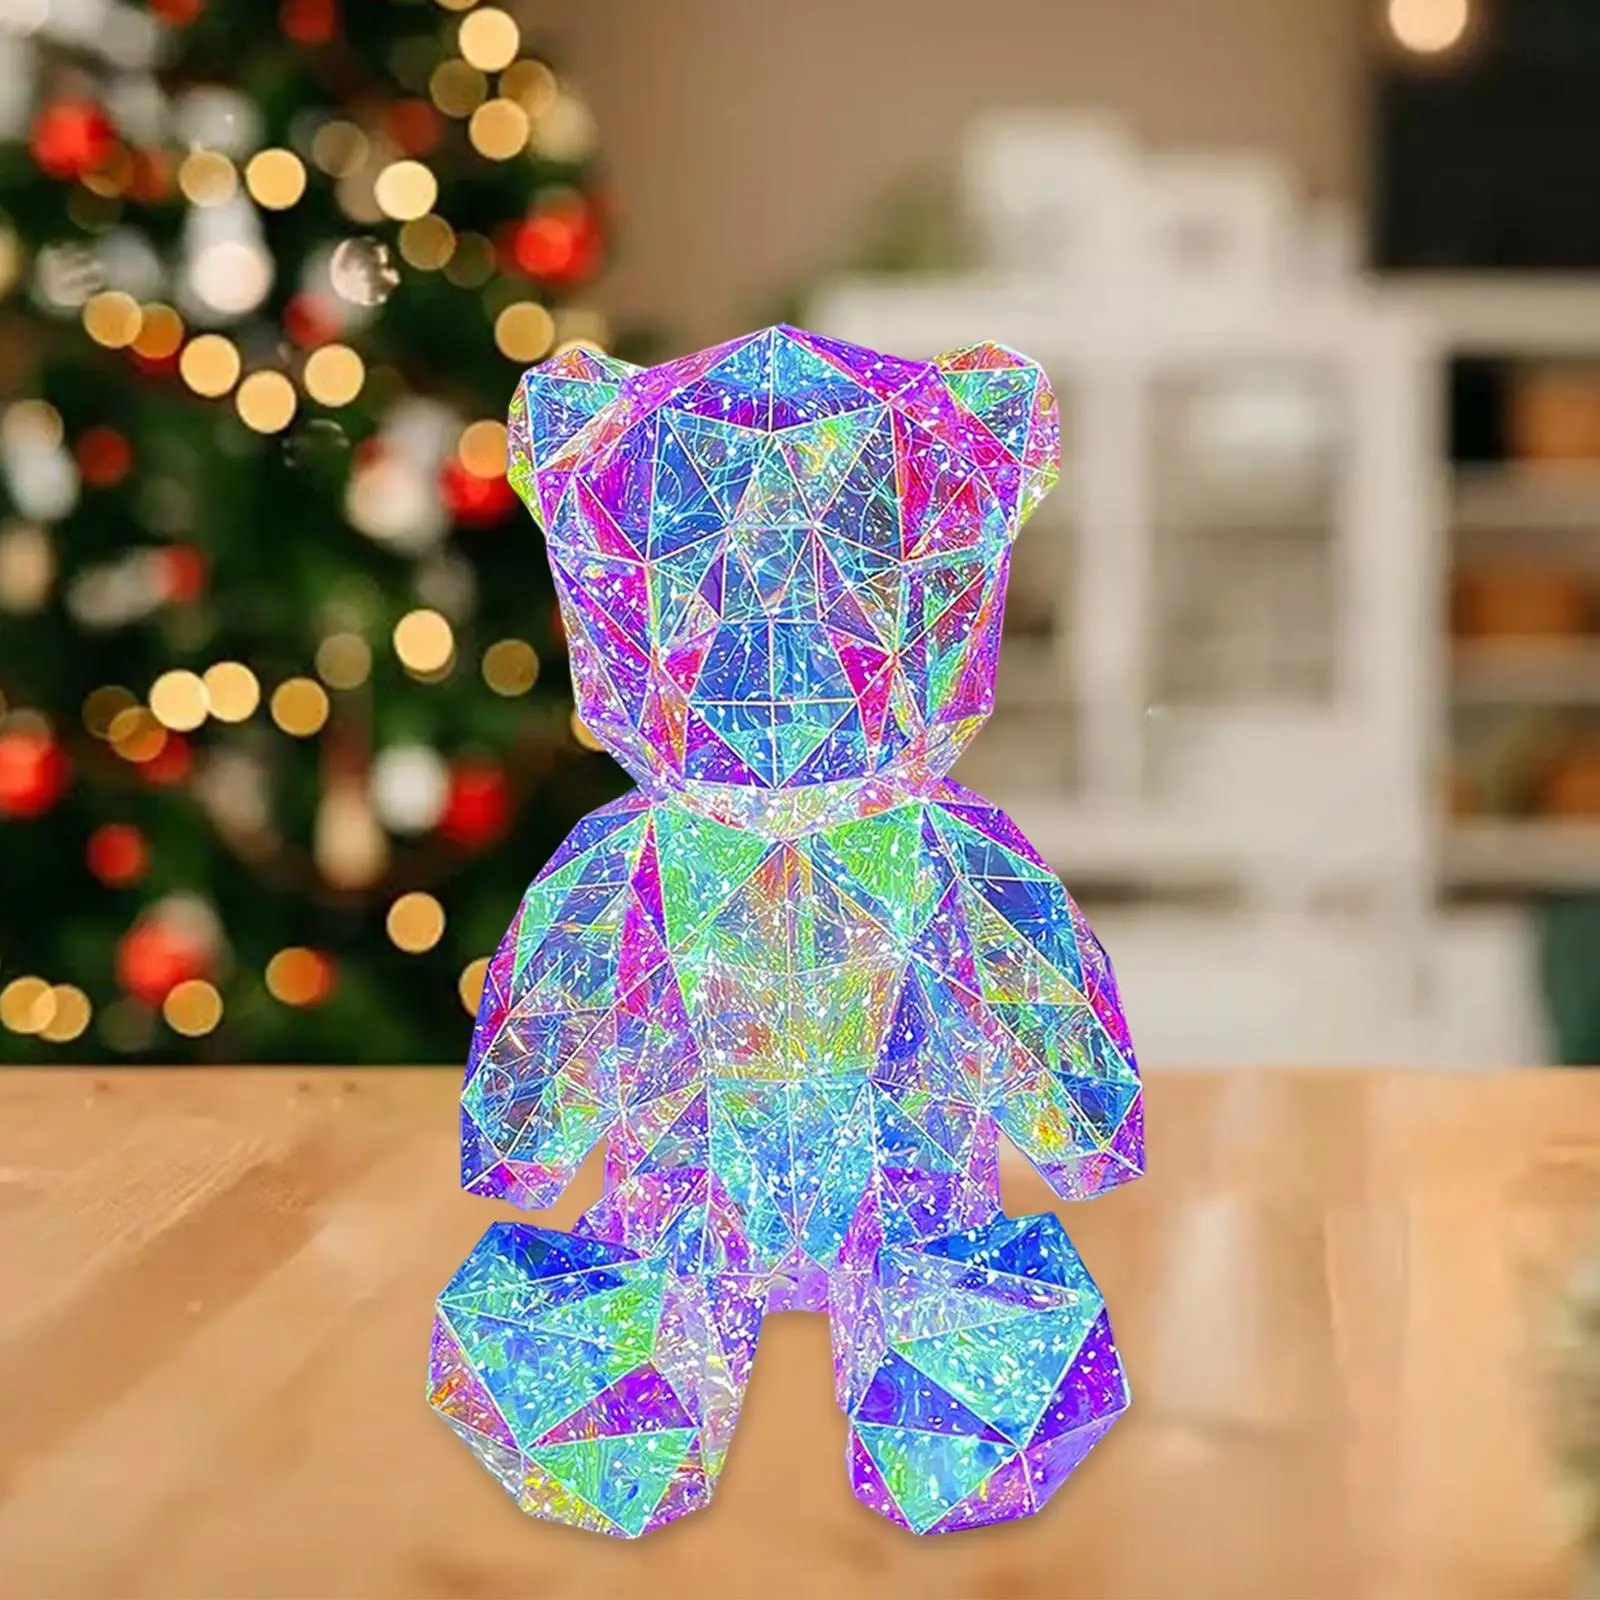 Novelty 3D LED Light Art Decor Decorative Accessories for Living Room Kids Party Home Birthday